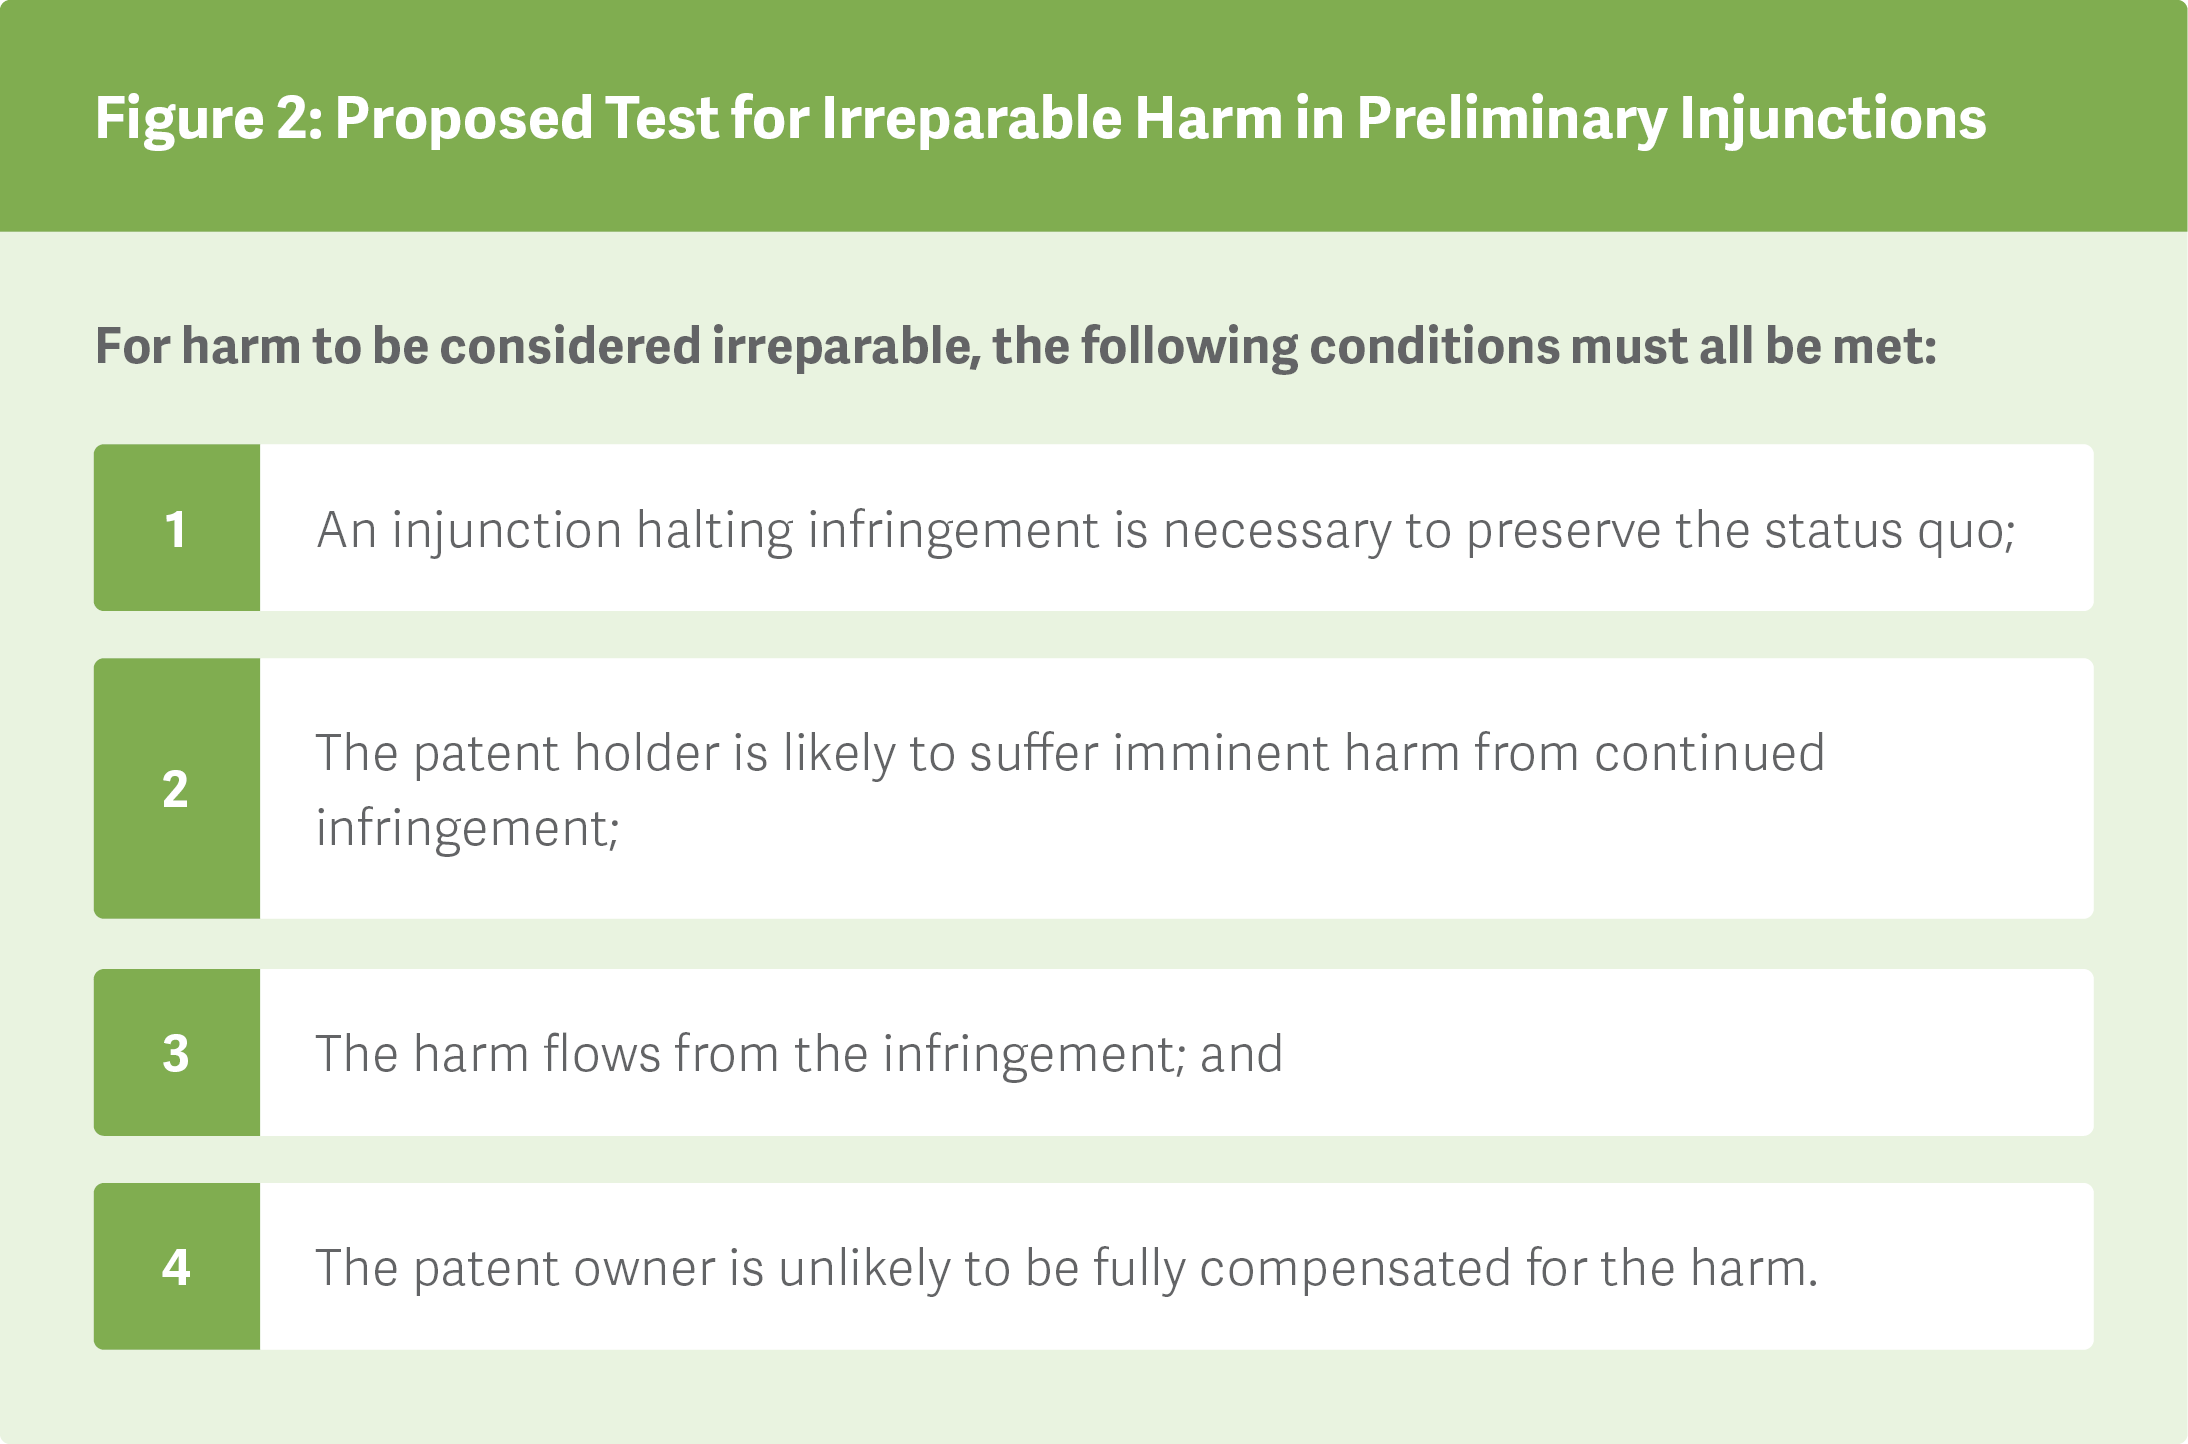 Figure 2: Proposed Test for Irreparable Harm in Preliminary Injunctions